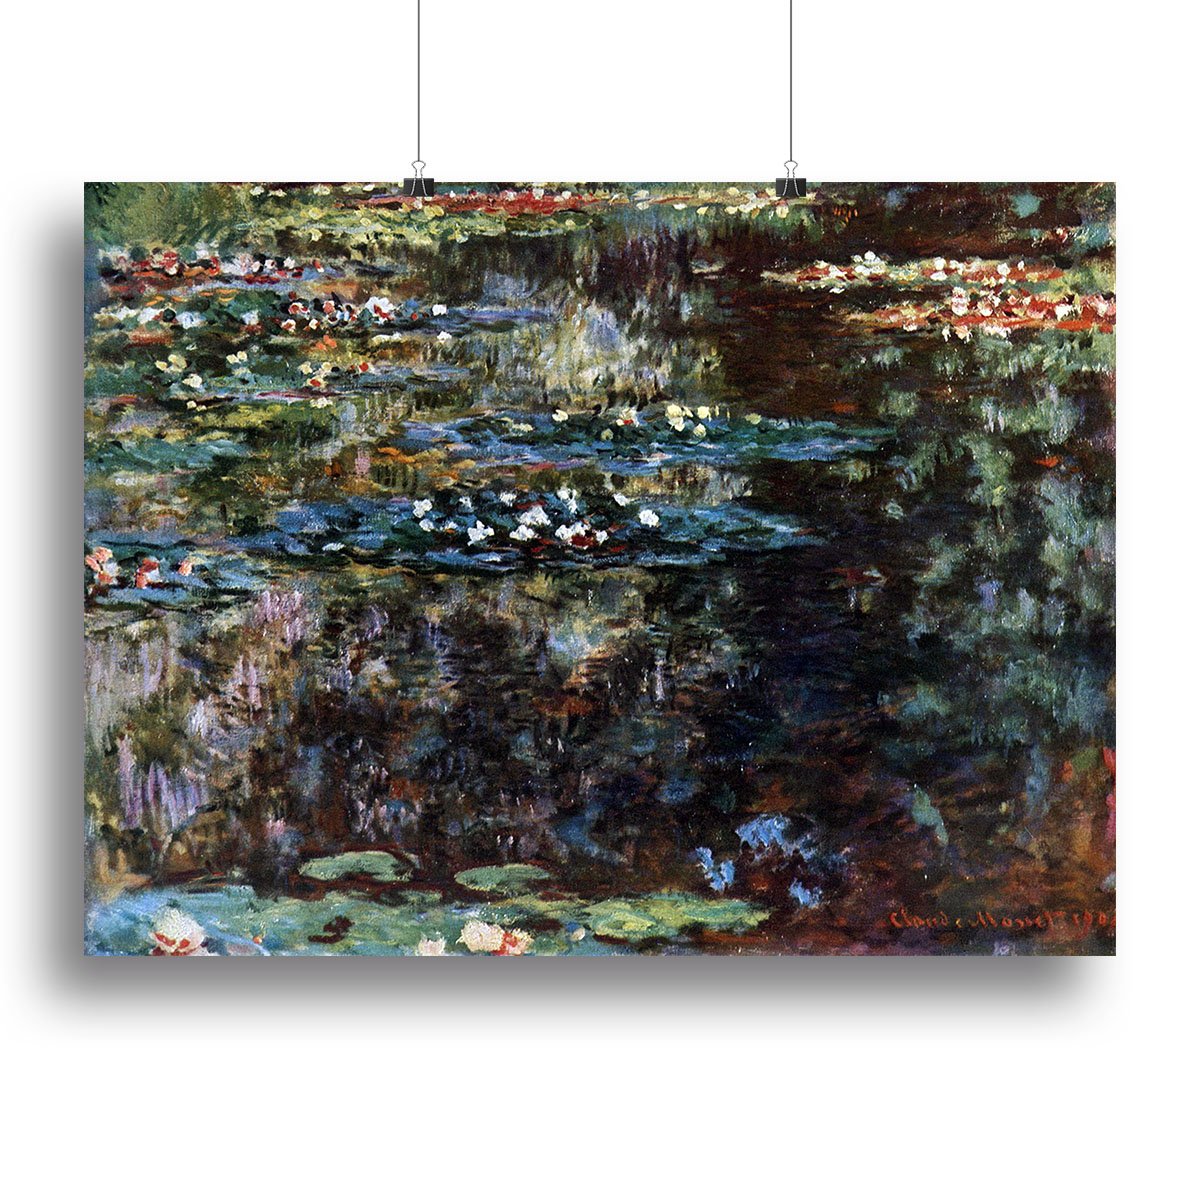 Water garden at Giverny by Monet Canvas Print or Poster